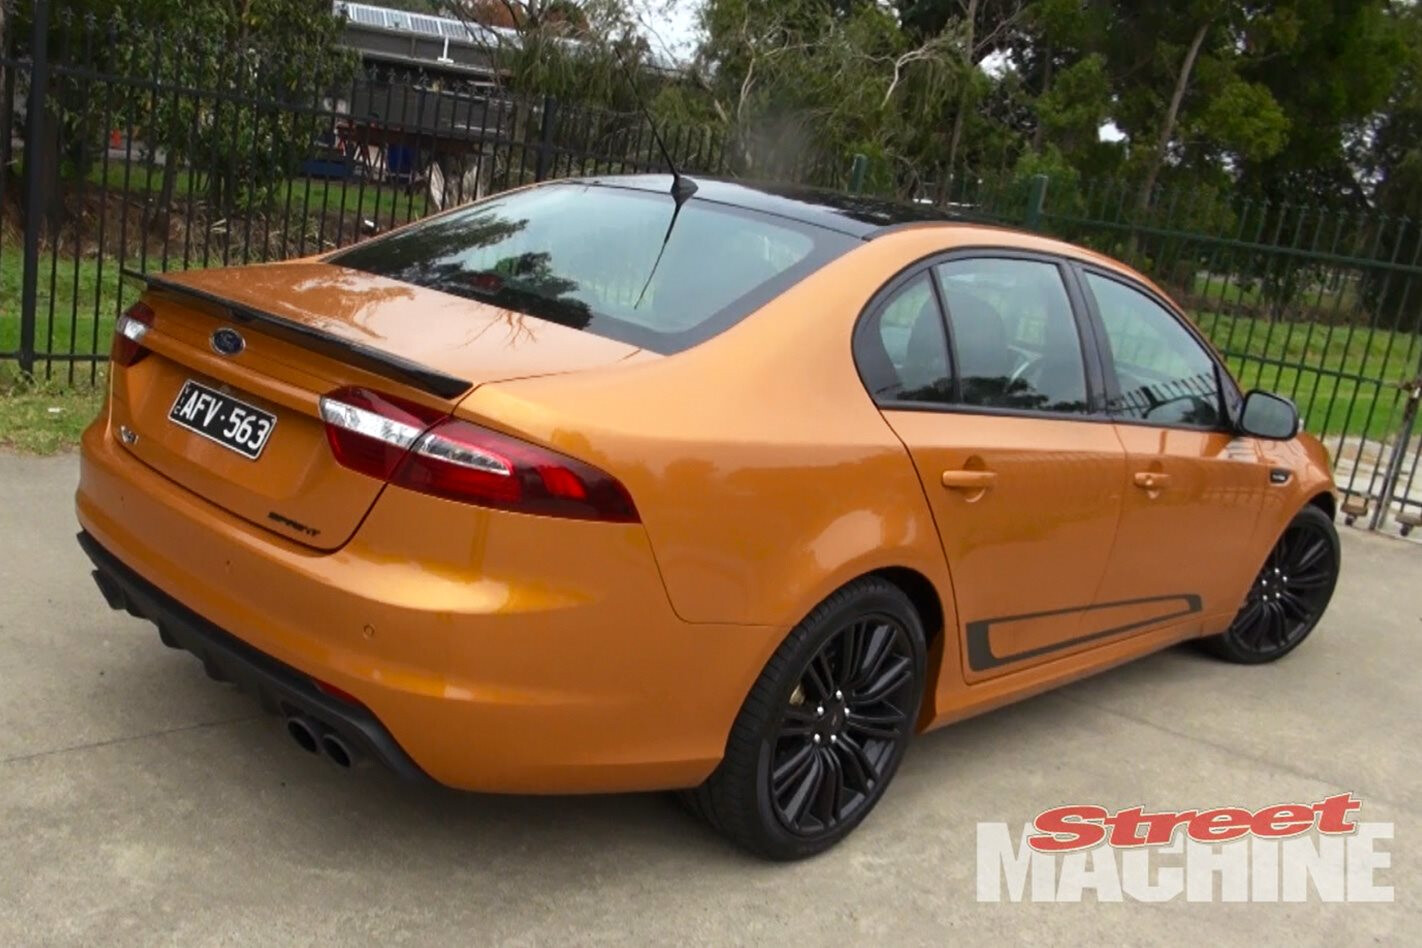 XR8 SPRINT TEST DRIVE – THE GOOD, THE BAD AND THE UGLY